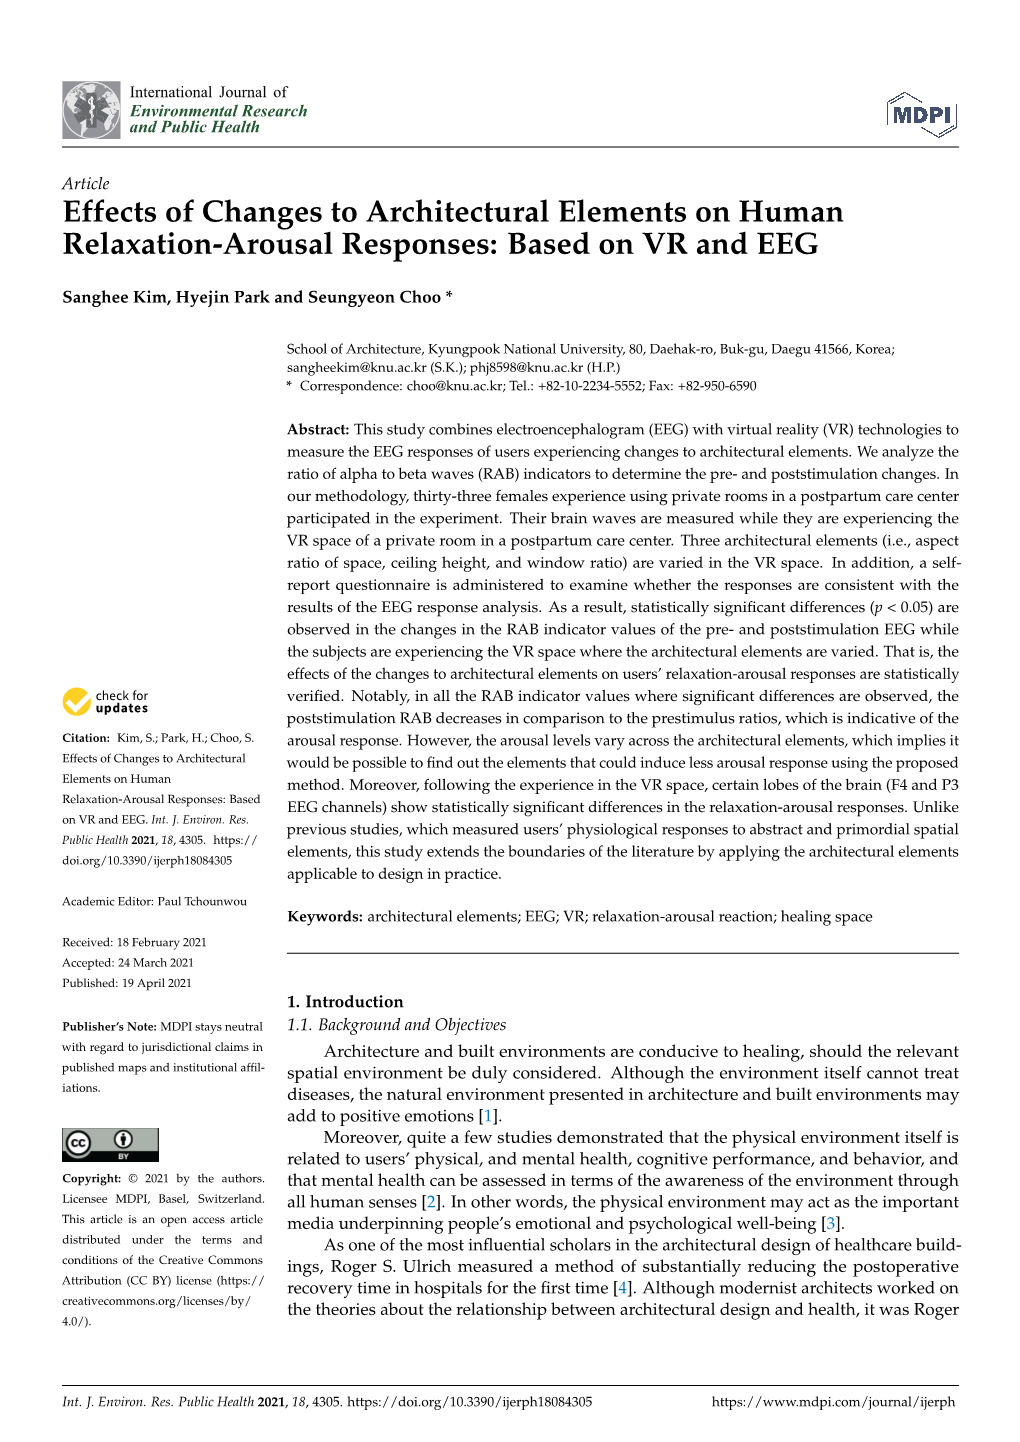 Effects of Changes to Architectural Elements on Human Relaxation-Arousal Responses: Based on VR and EEG